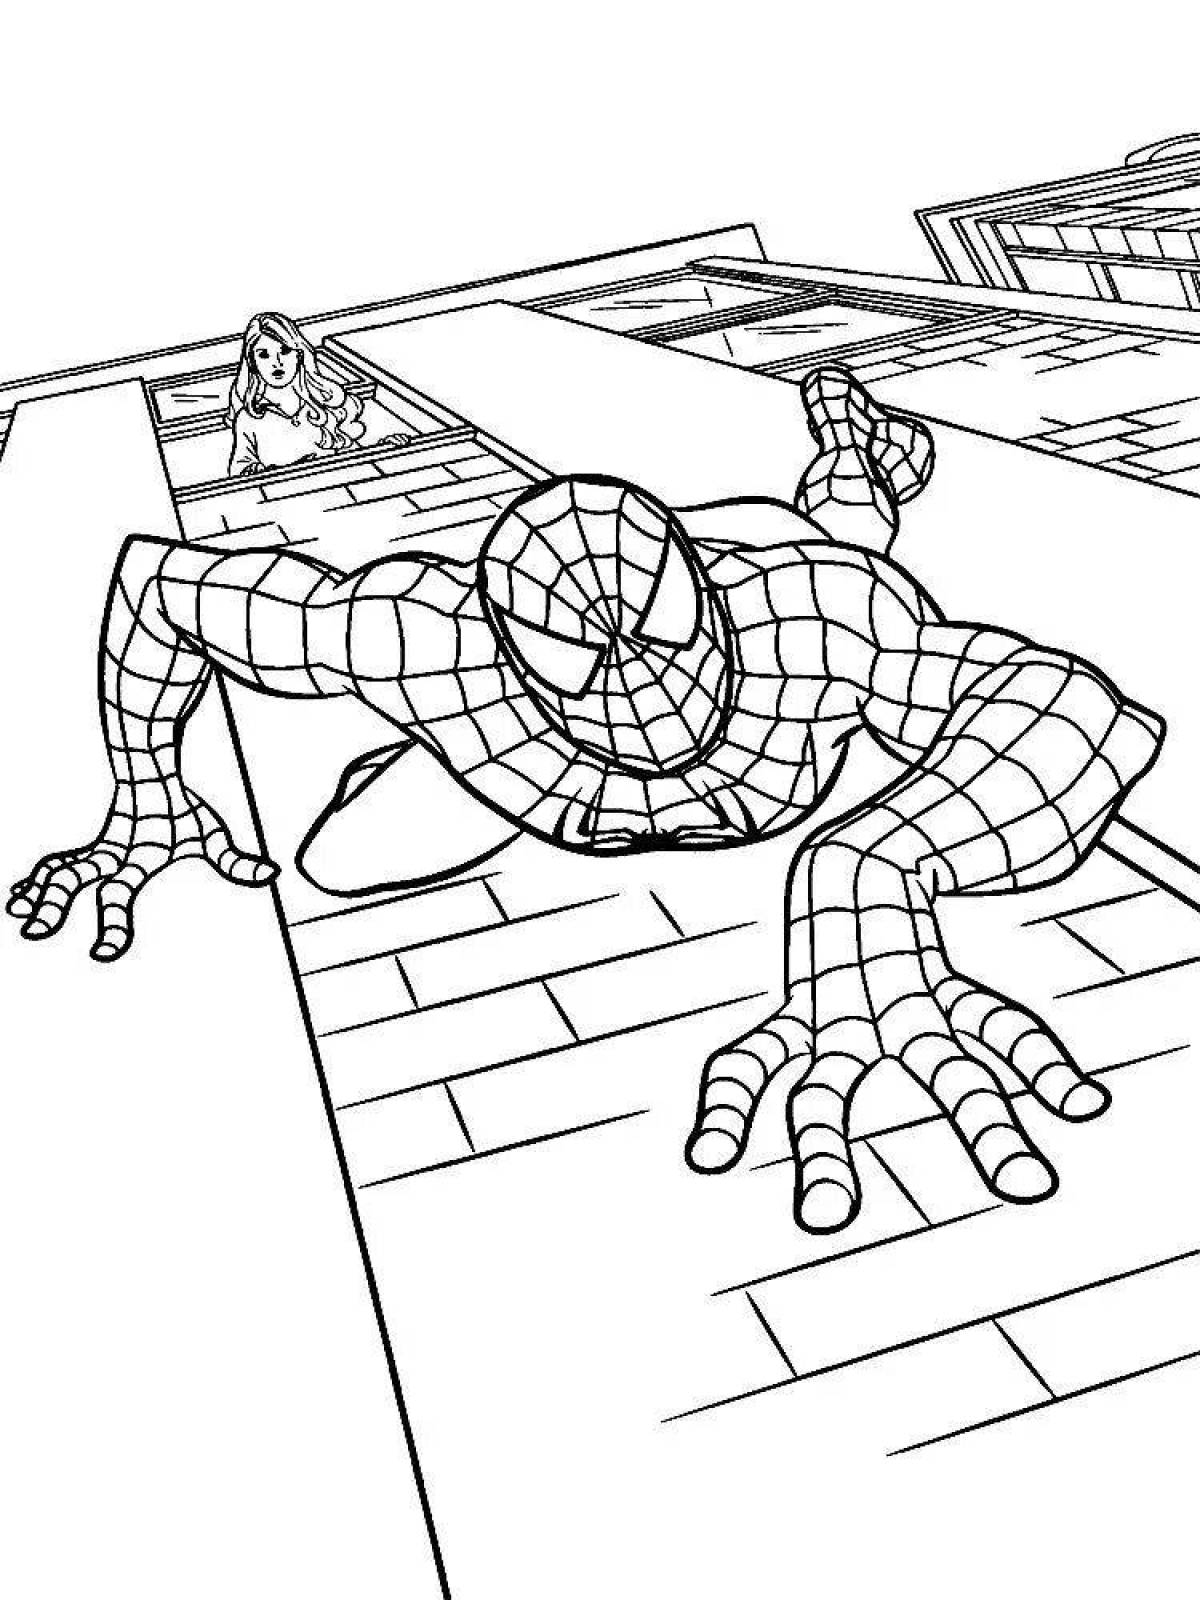 Spiderman for kids 5 years old #8